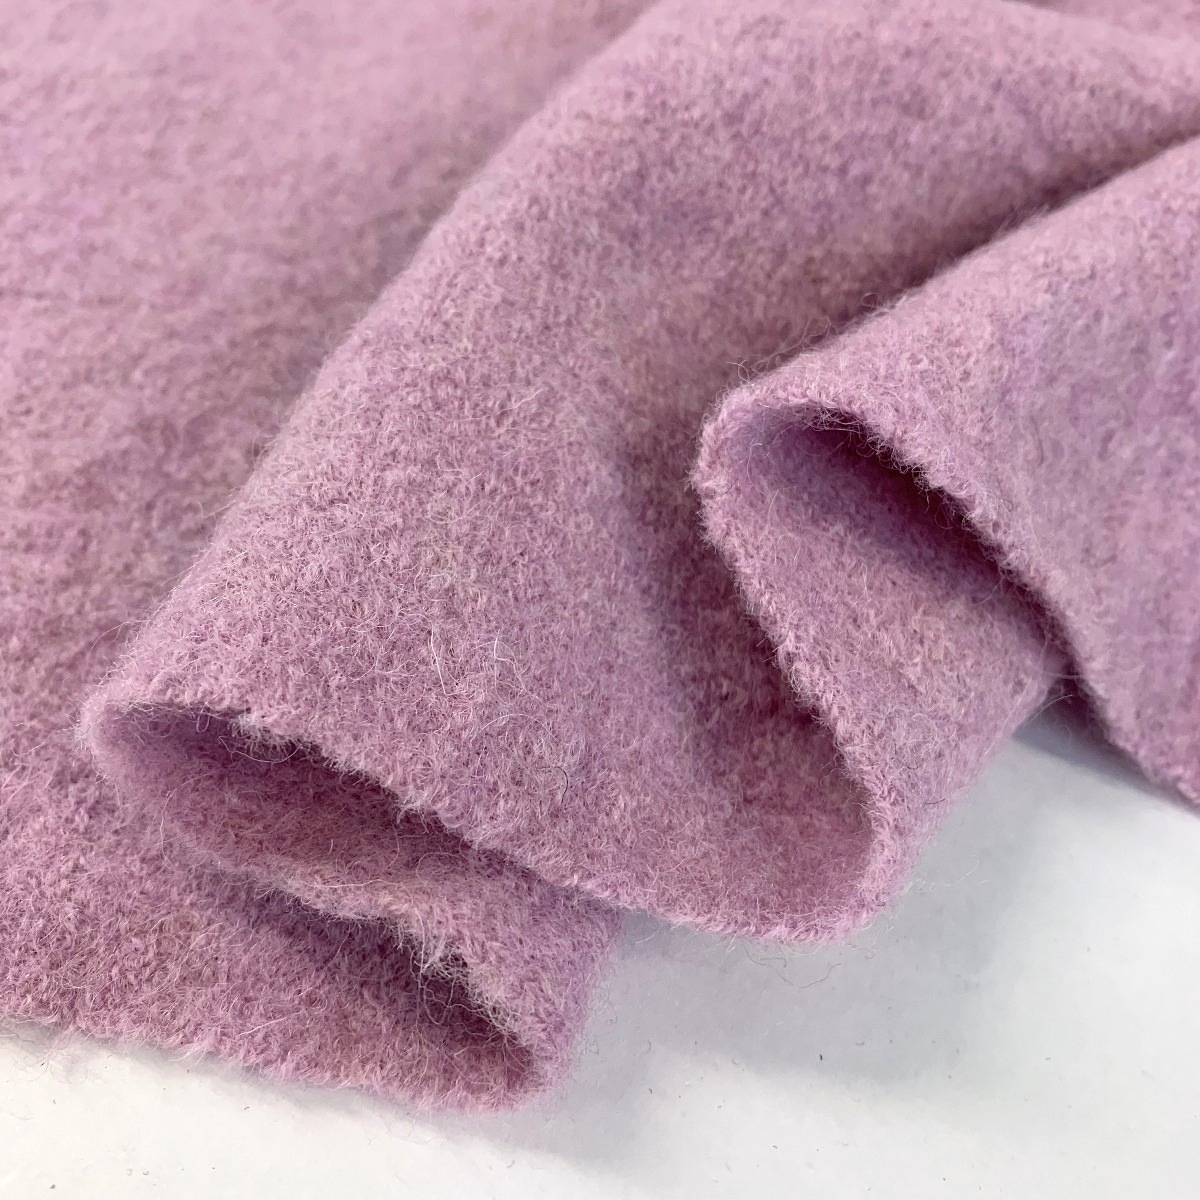 https://www.croftmill.fr/images/pictures/2-2021/02-febuary-2021/pure-luxury-boiled-wool-violet-fold-2.jpg?v=bfa6b72b